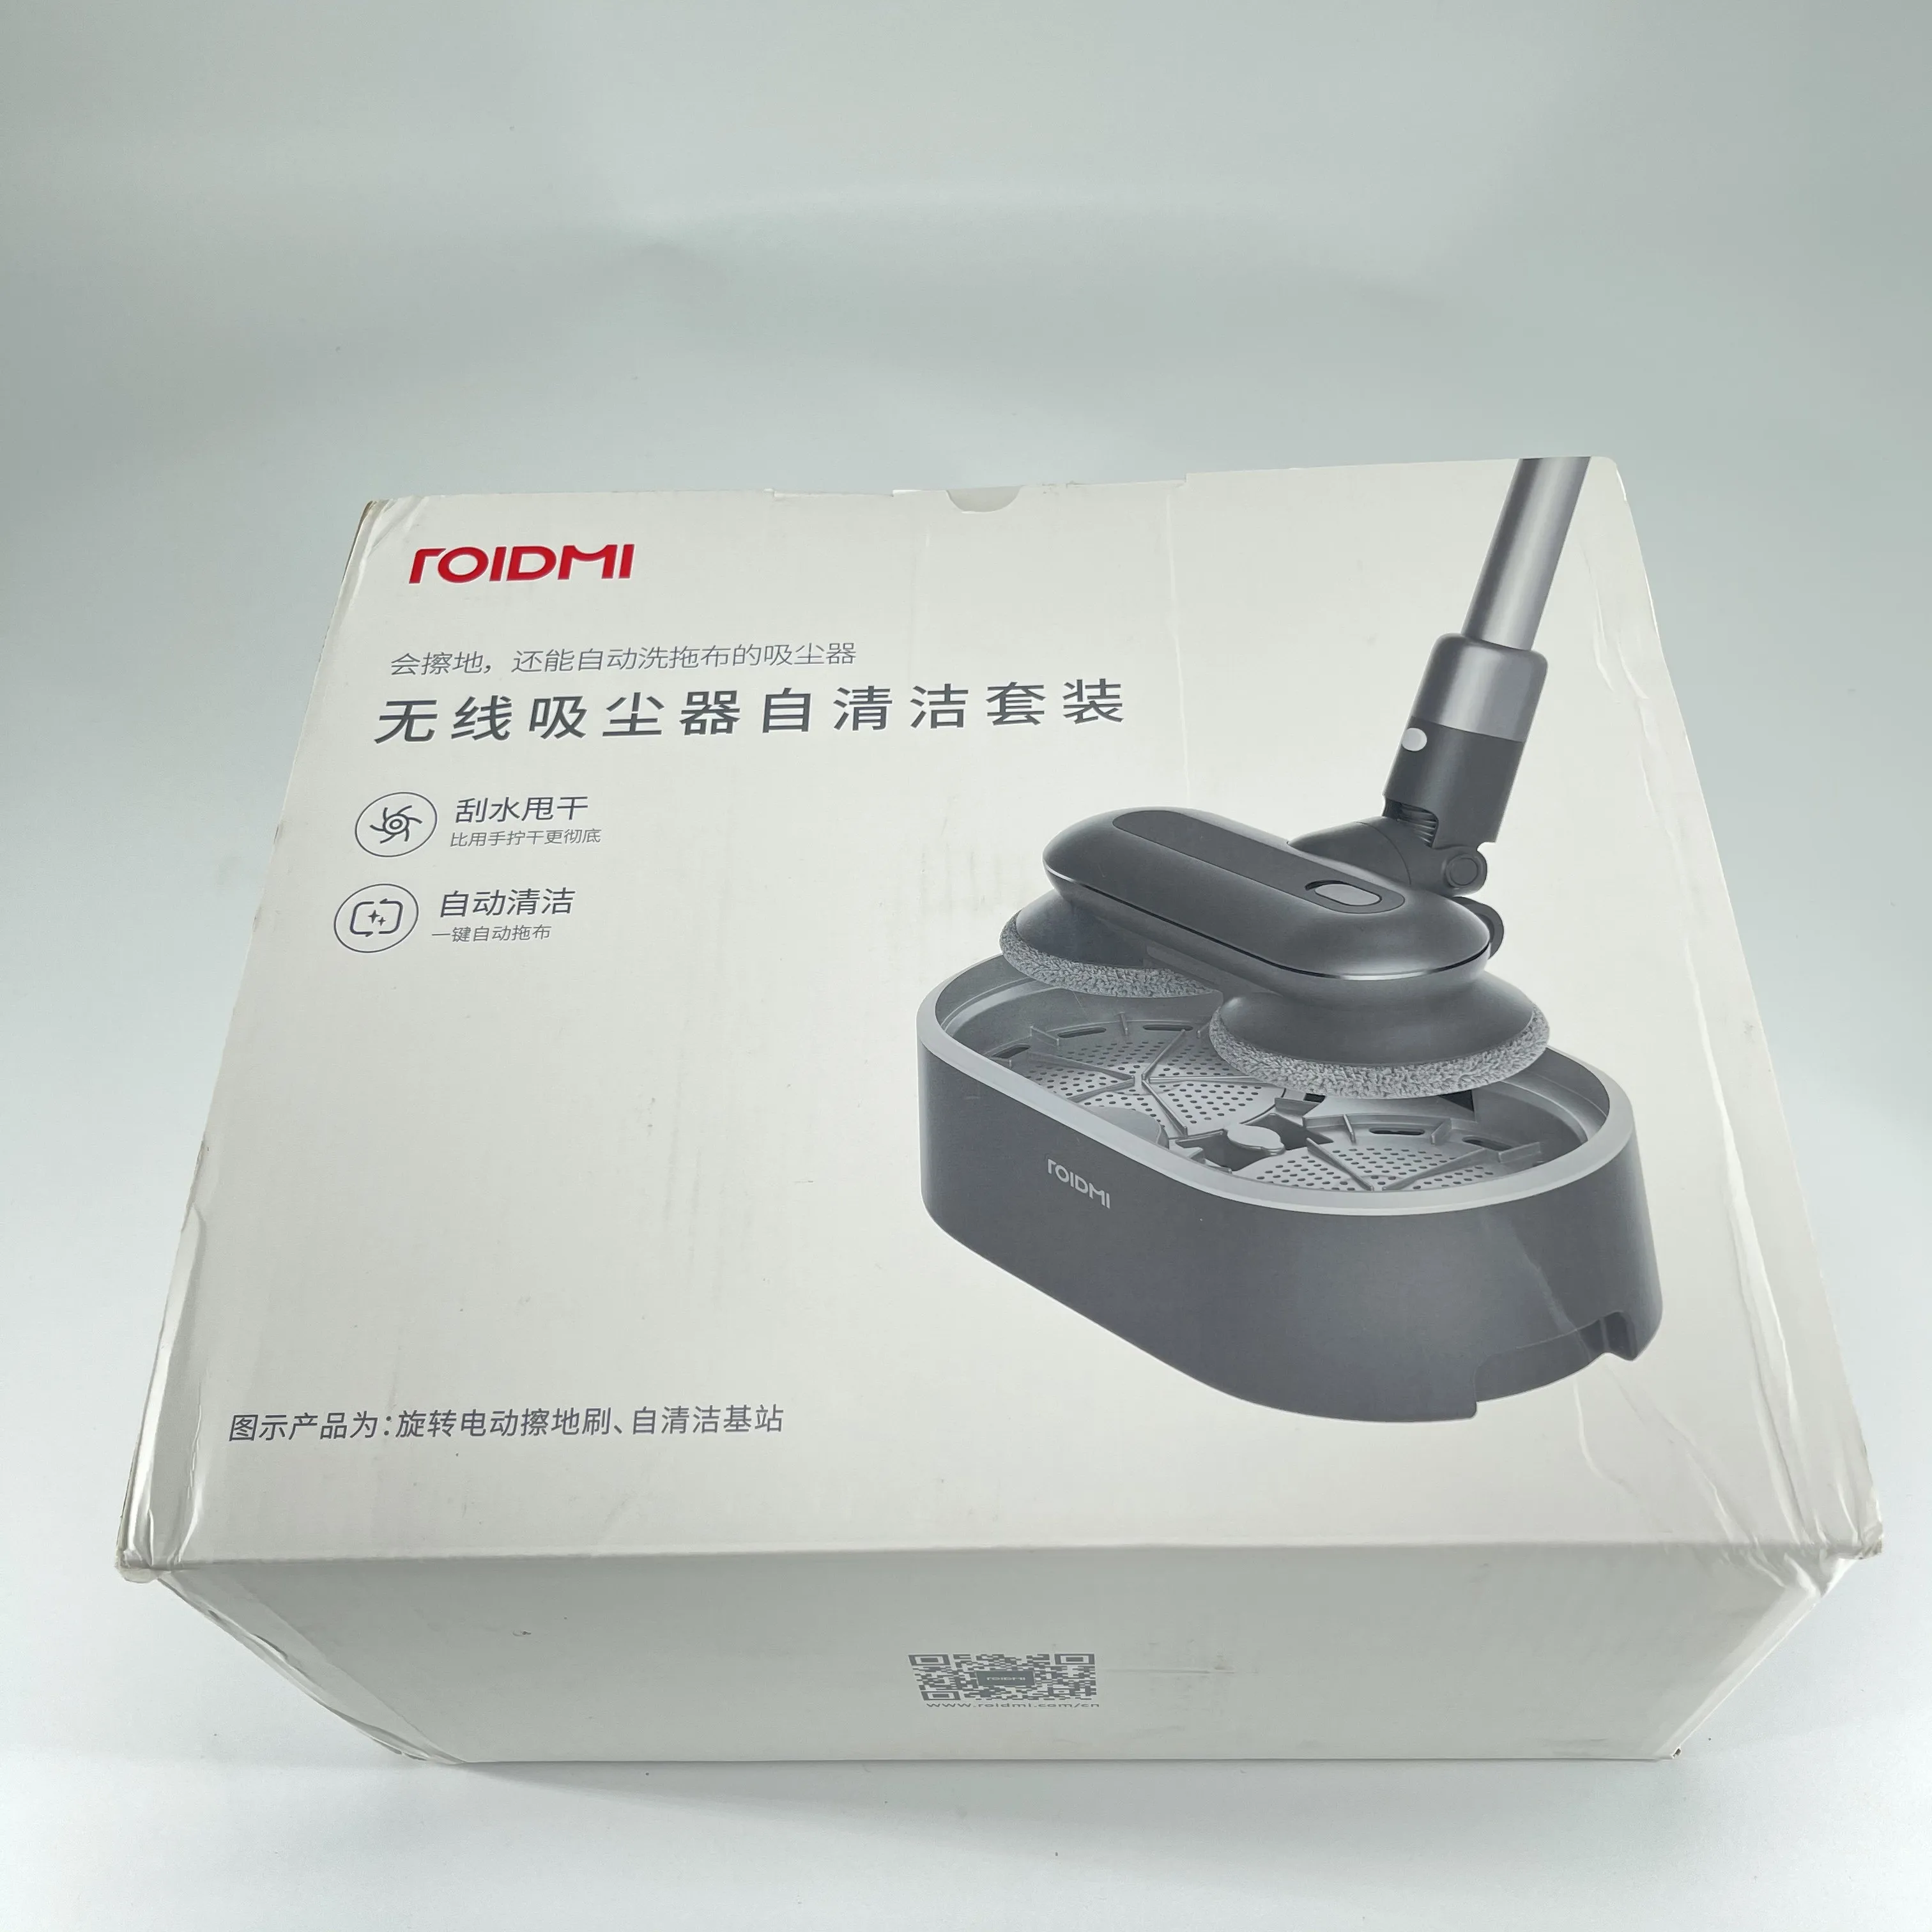 Roidmi x30 plus original self-cleaning base station, dual rotary electric wiper brush accessories